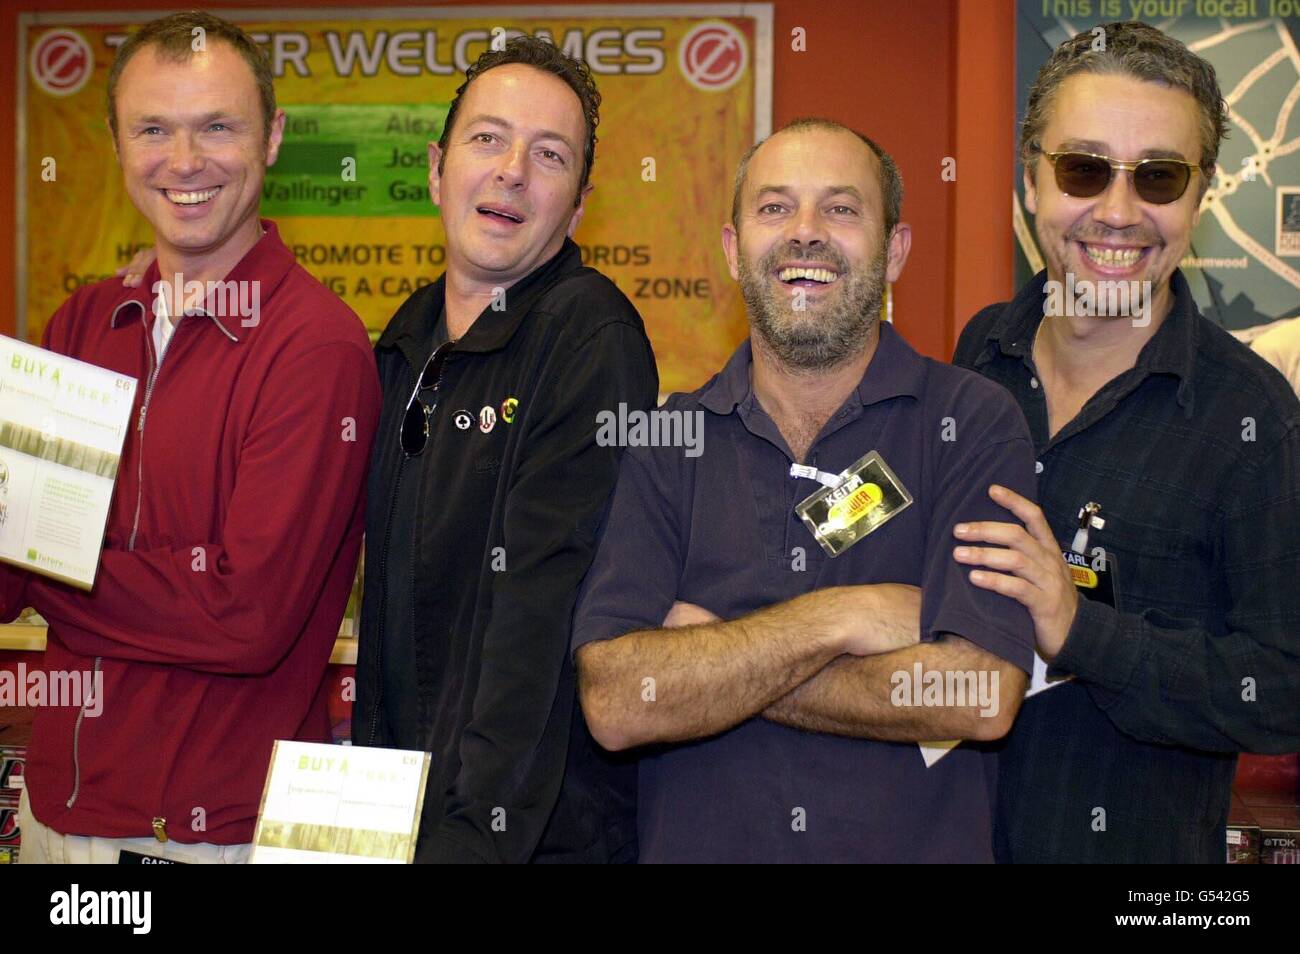 (L-R) Gary Kemp from Spandau Ballet, Joe Strummer, from The Clash, Keith Allen, from Fat Les and Carl Walinger from World Party, at Tower Records in Piccadilly, central London, where they backed a national organisation called Future Forests. *...whose aim is to plant trees to negate carbon emissions in the environment caused by cars, industry etc. Stock Photo